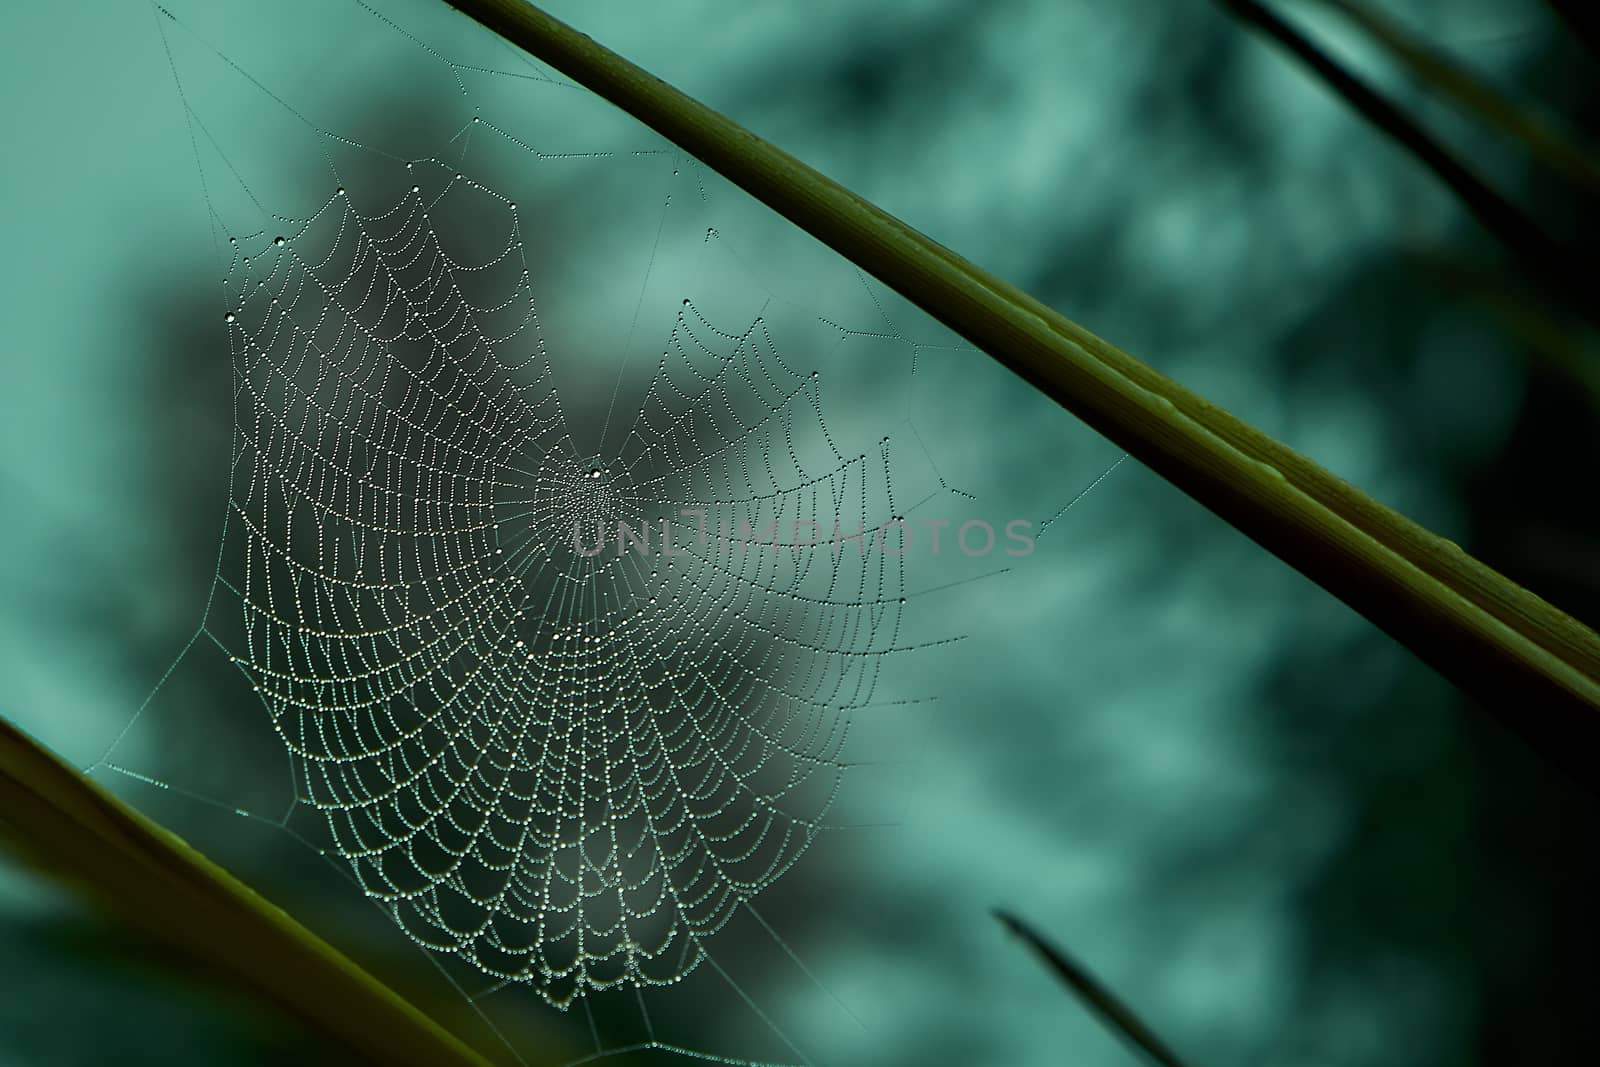 Spider web covered with dew drops between tree branches by SoniaKarelitz